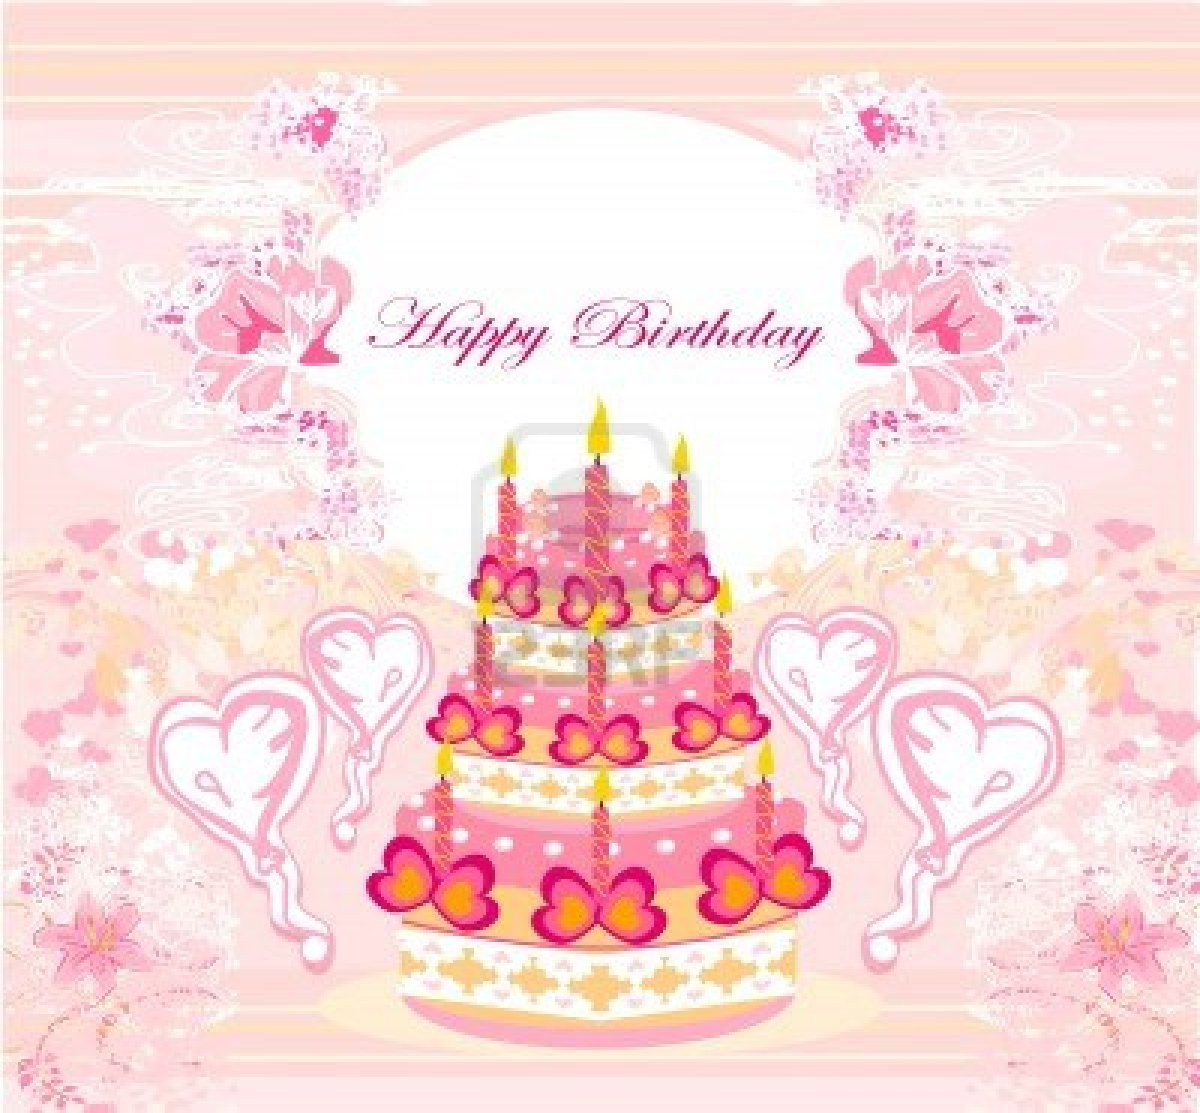 Birthday Cards Pictures
 35 Happy Birthday Cards Free To Download – The WoW Style